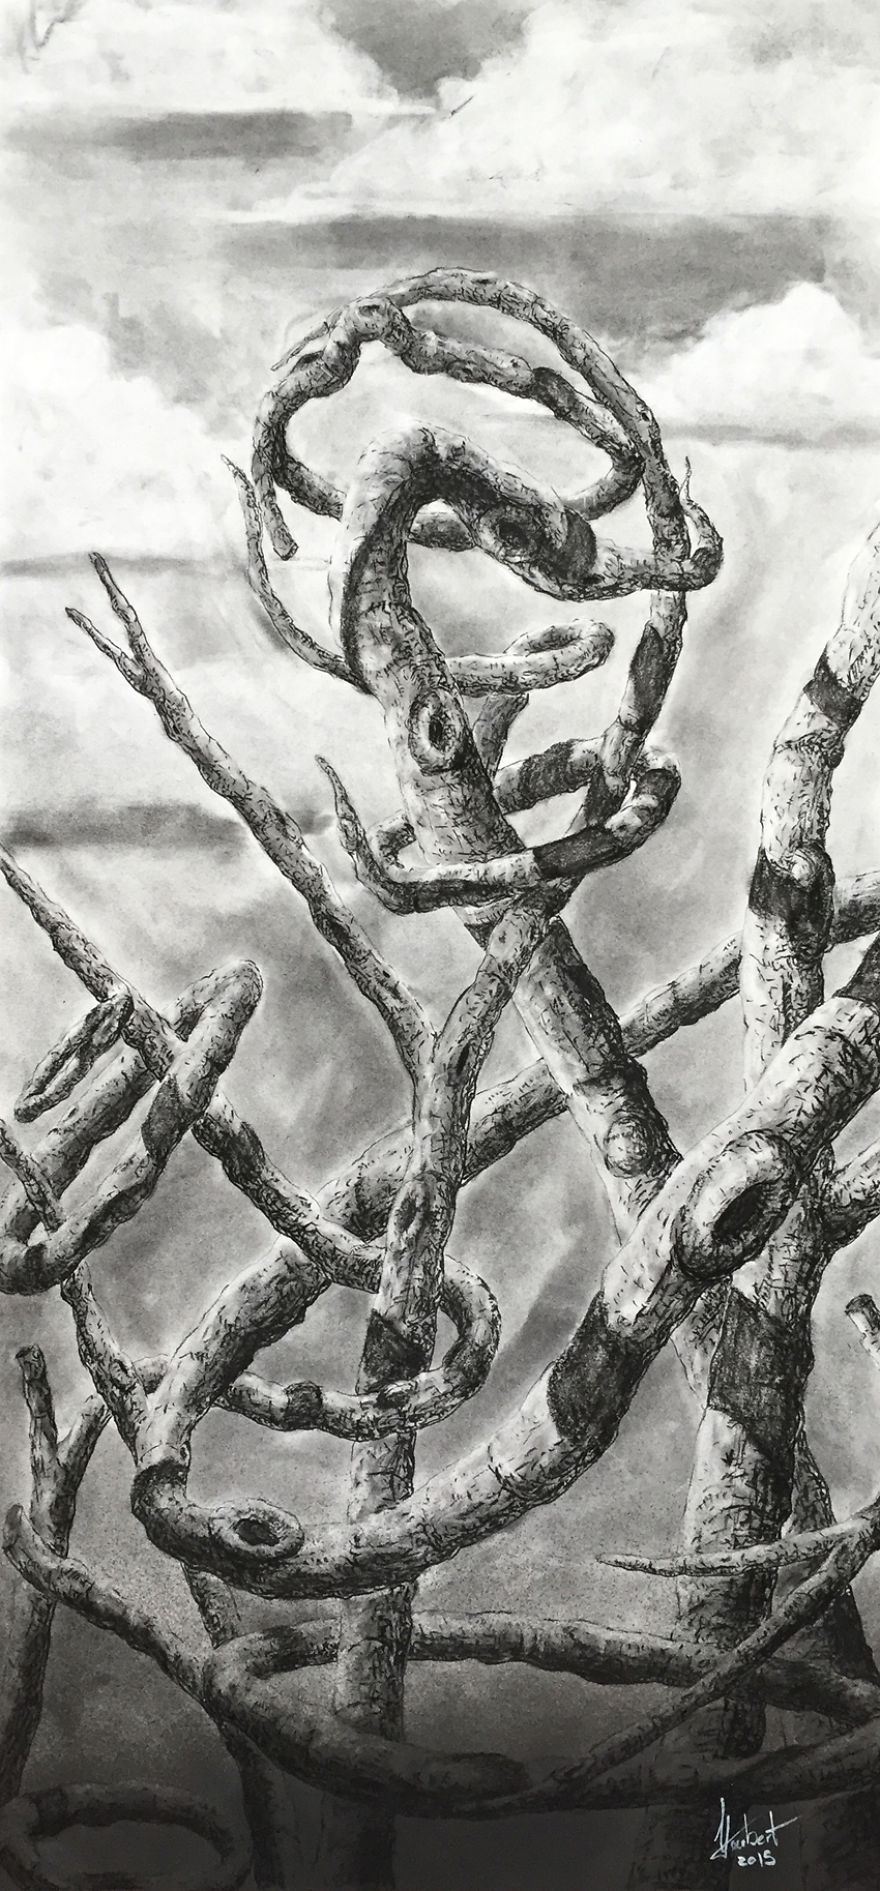 I Draw Surreal Stick Men With Ink And Charcoal